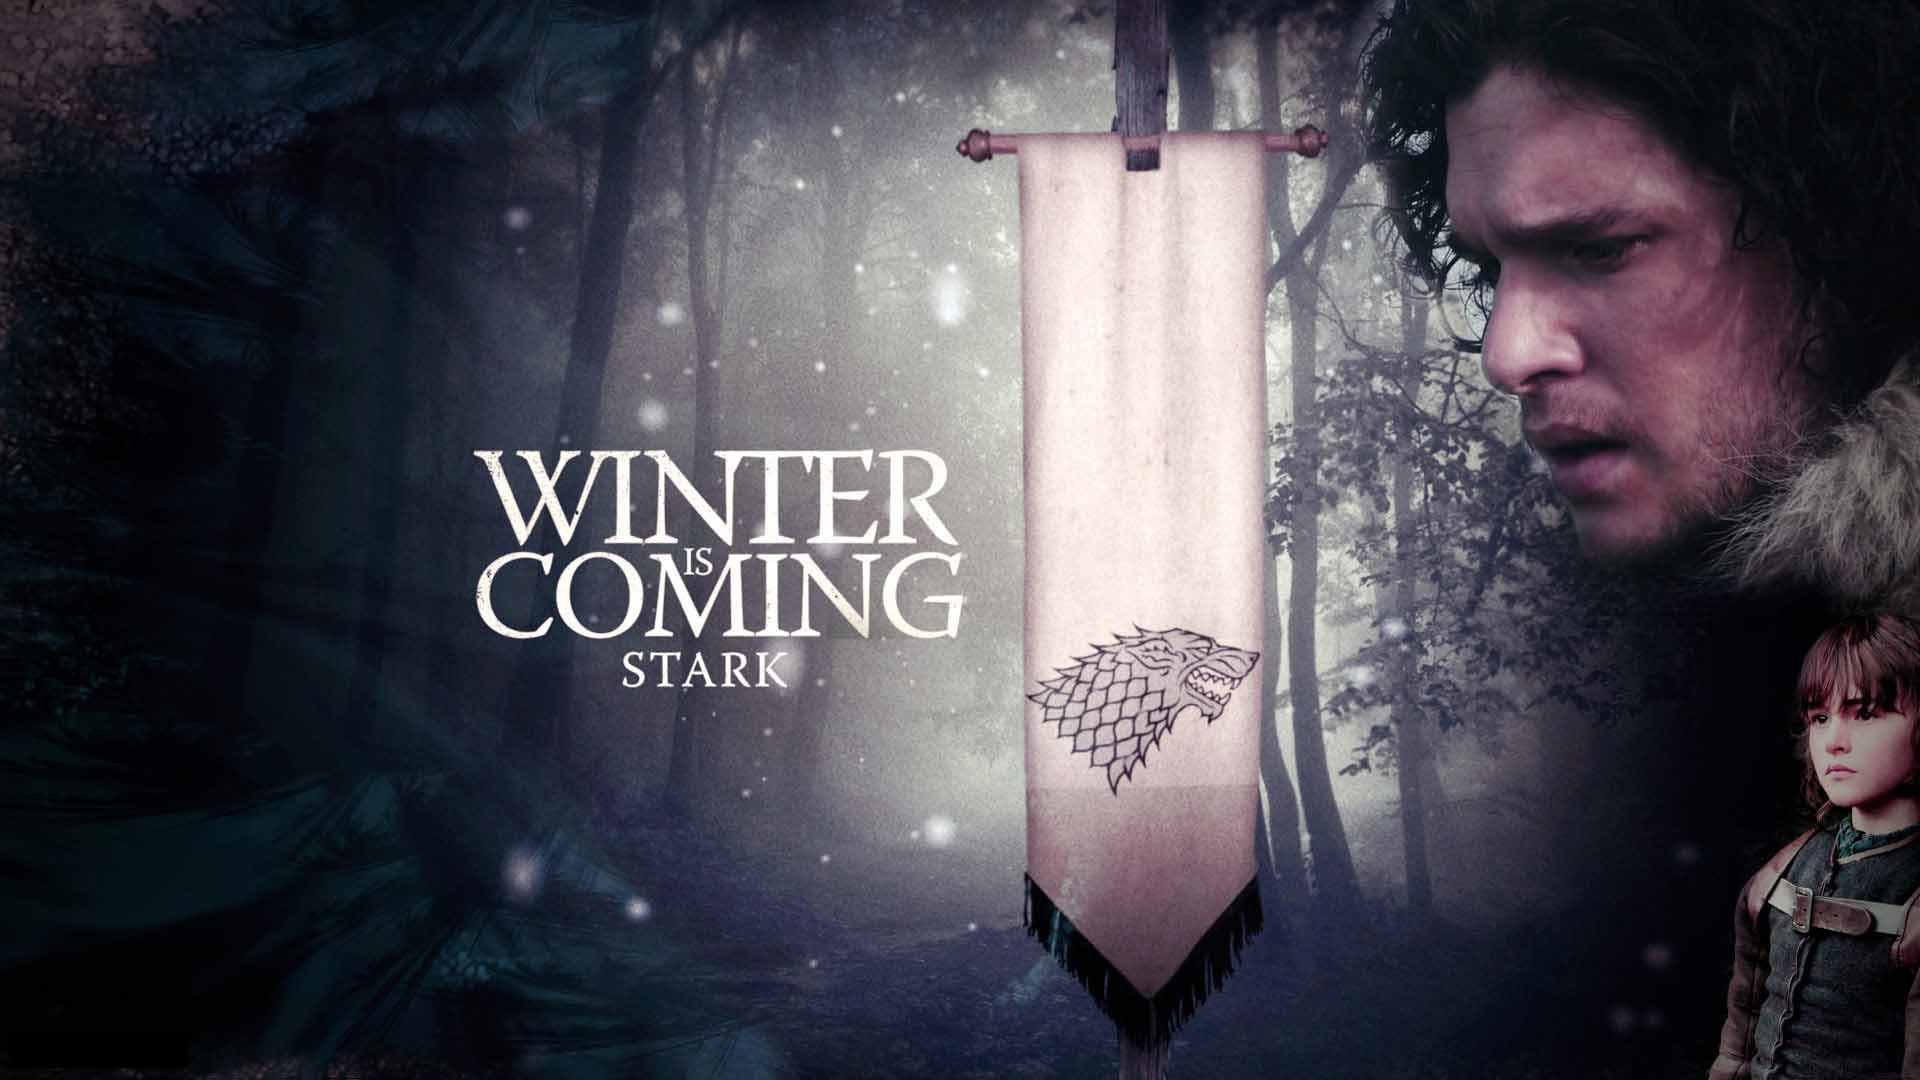 1920x1080 Wallpapers & Backgrounds | Game of Thrones Seasons 3 HD Wallpapers .